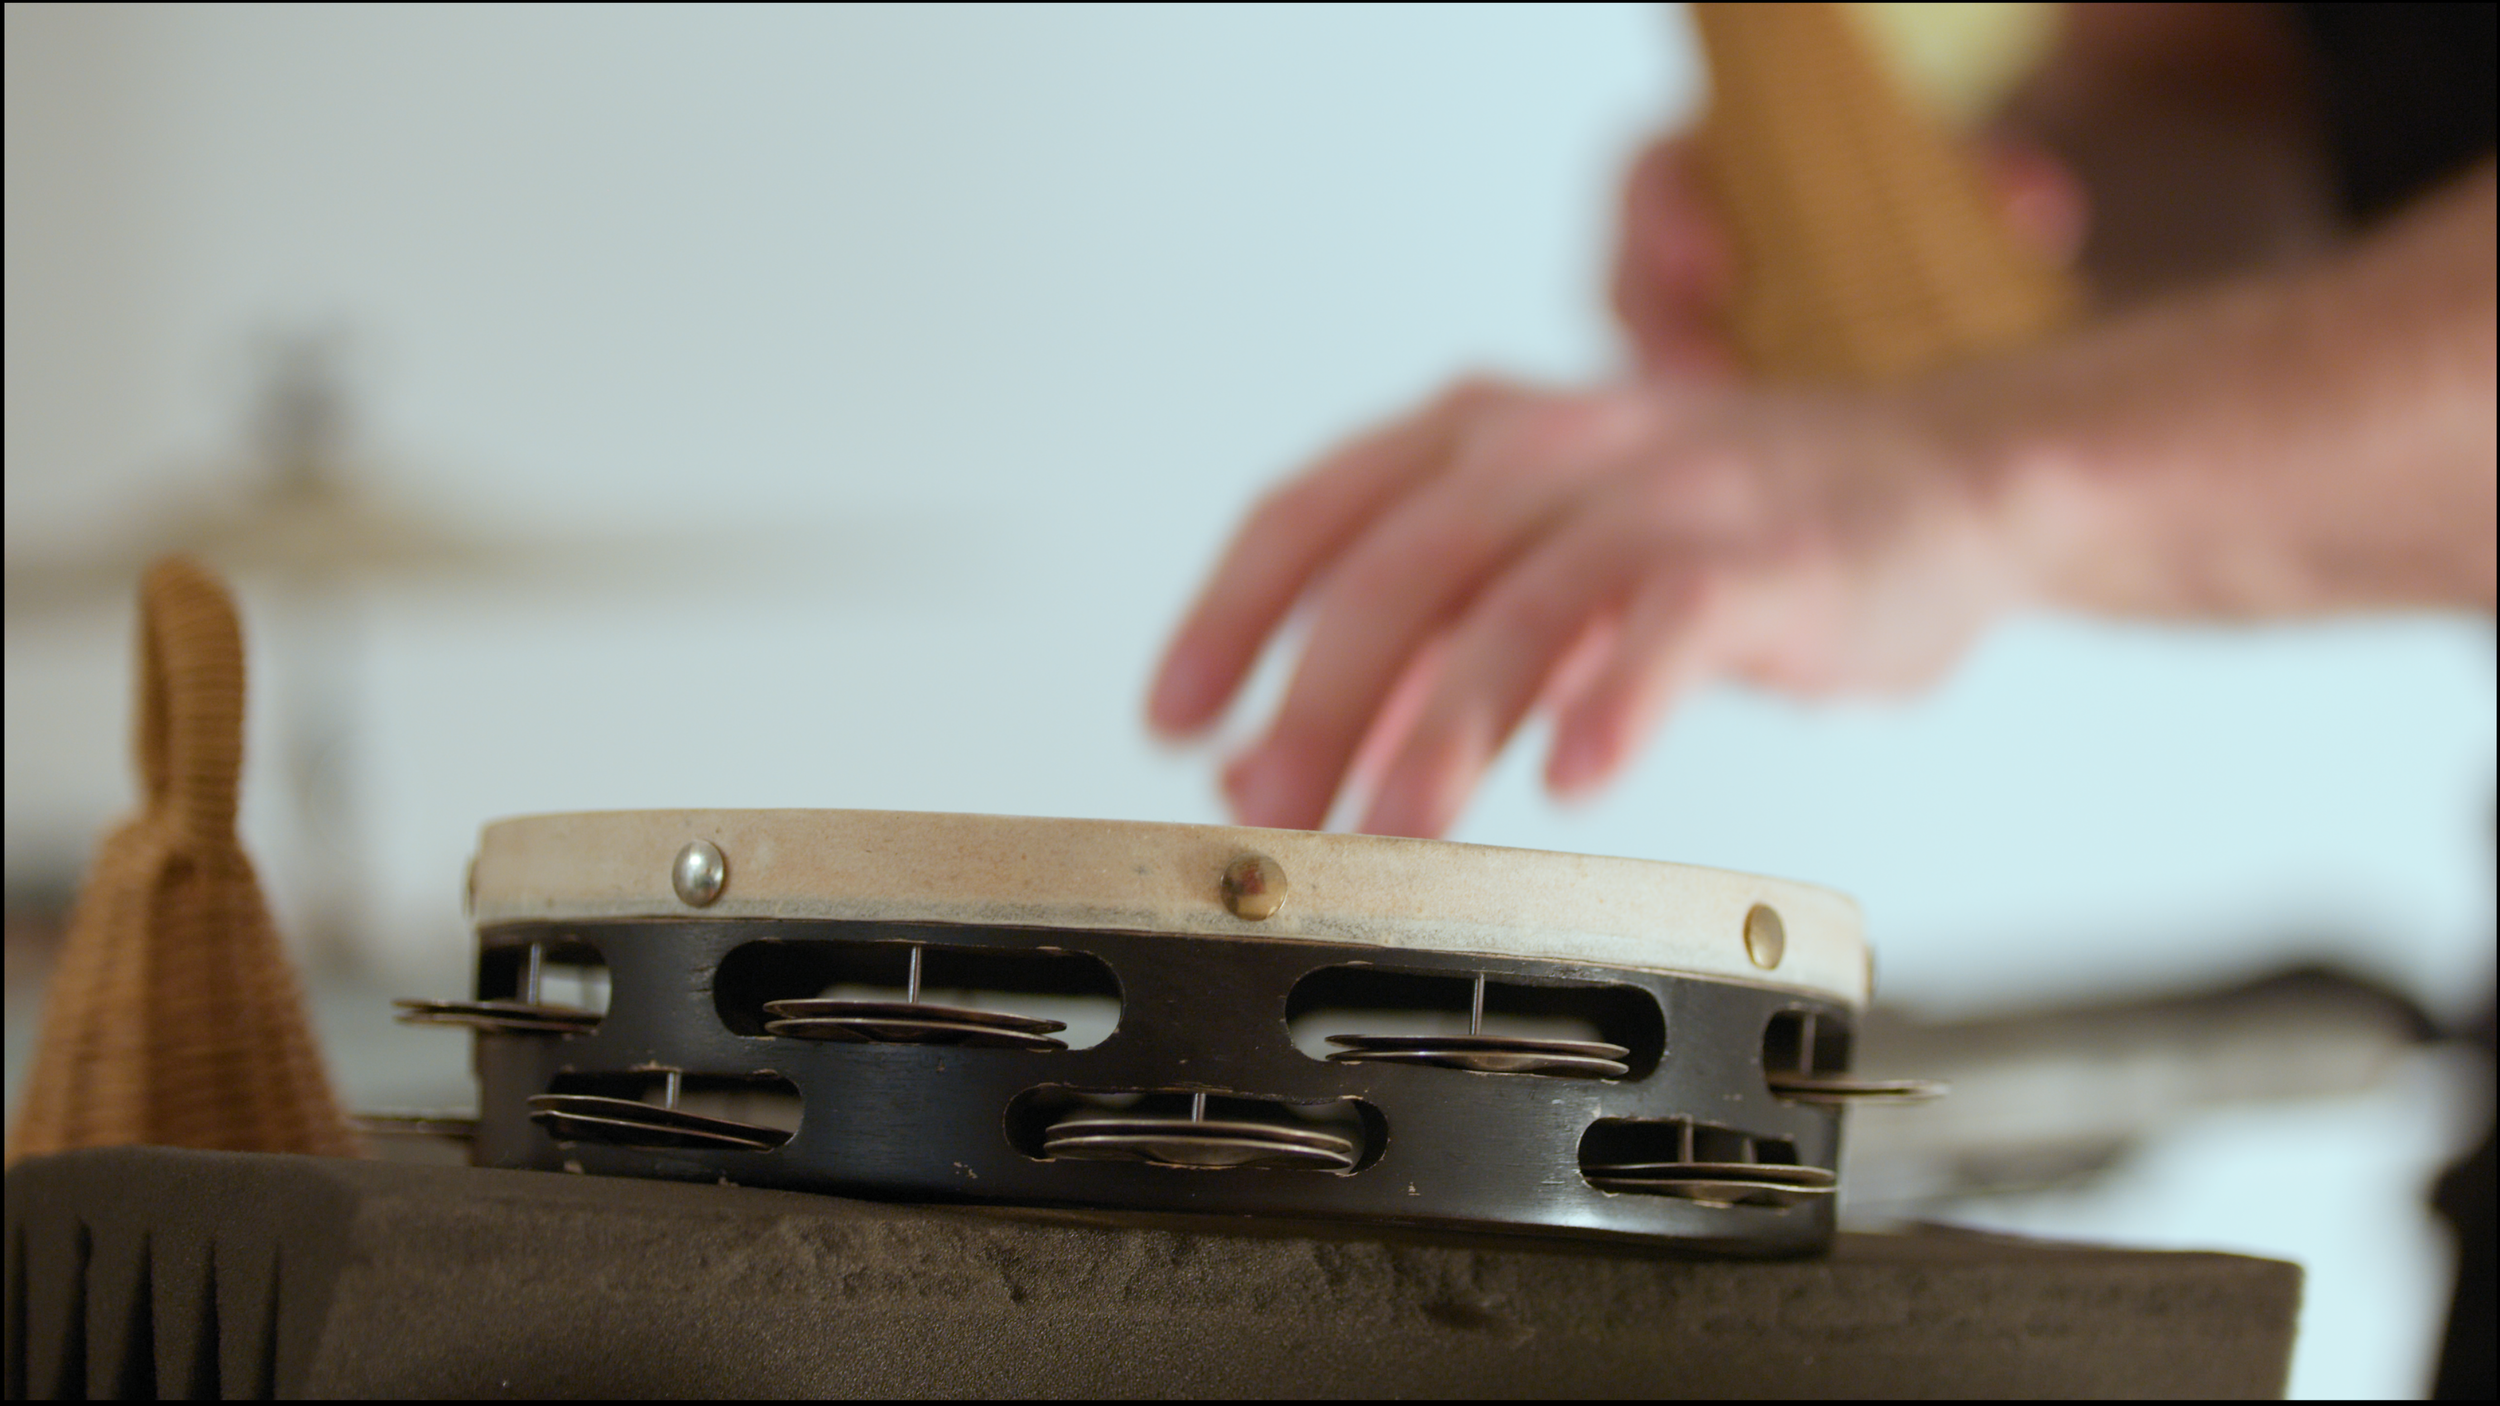 7. A close-up image of a percussionist playing a mounted tambourine with their hands.